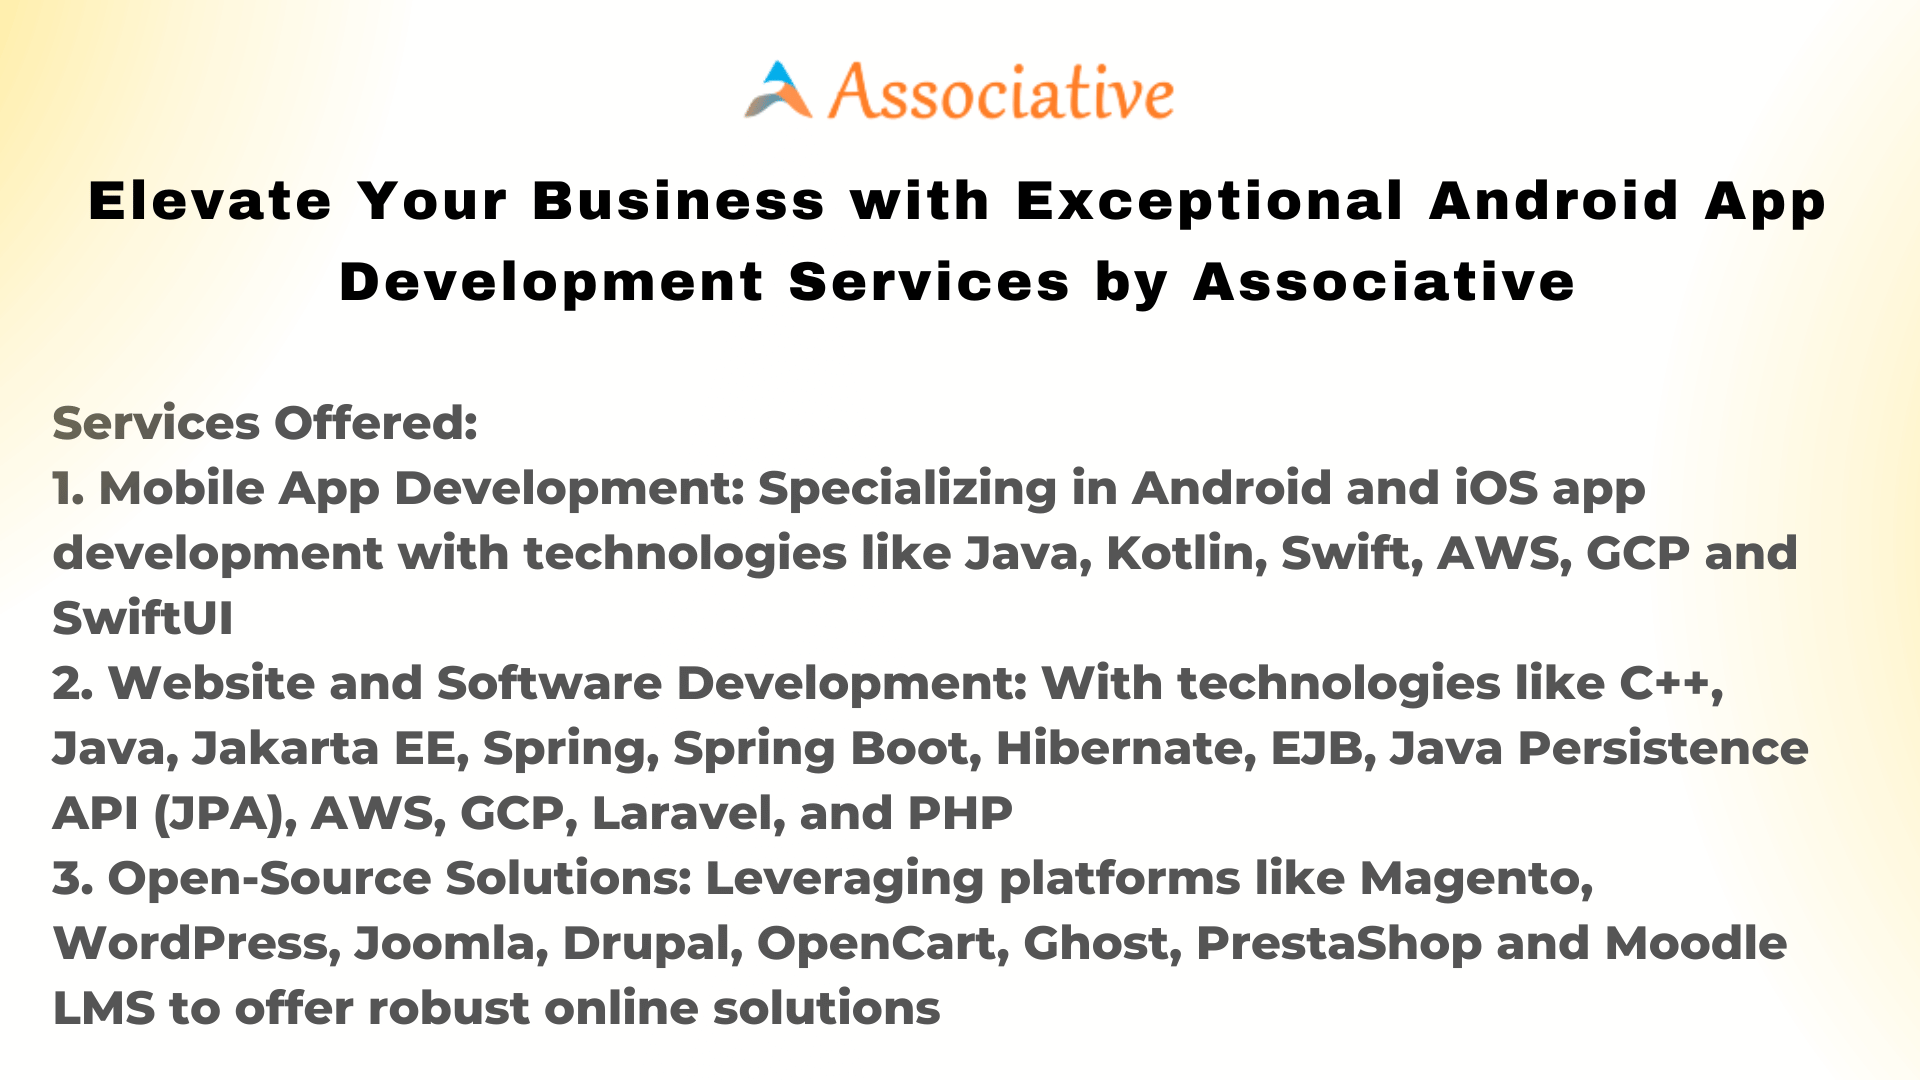 Elevate Your Business with Exceptional Android App Development Services by Associative